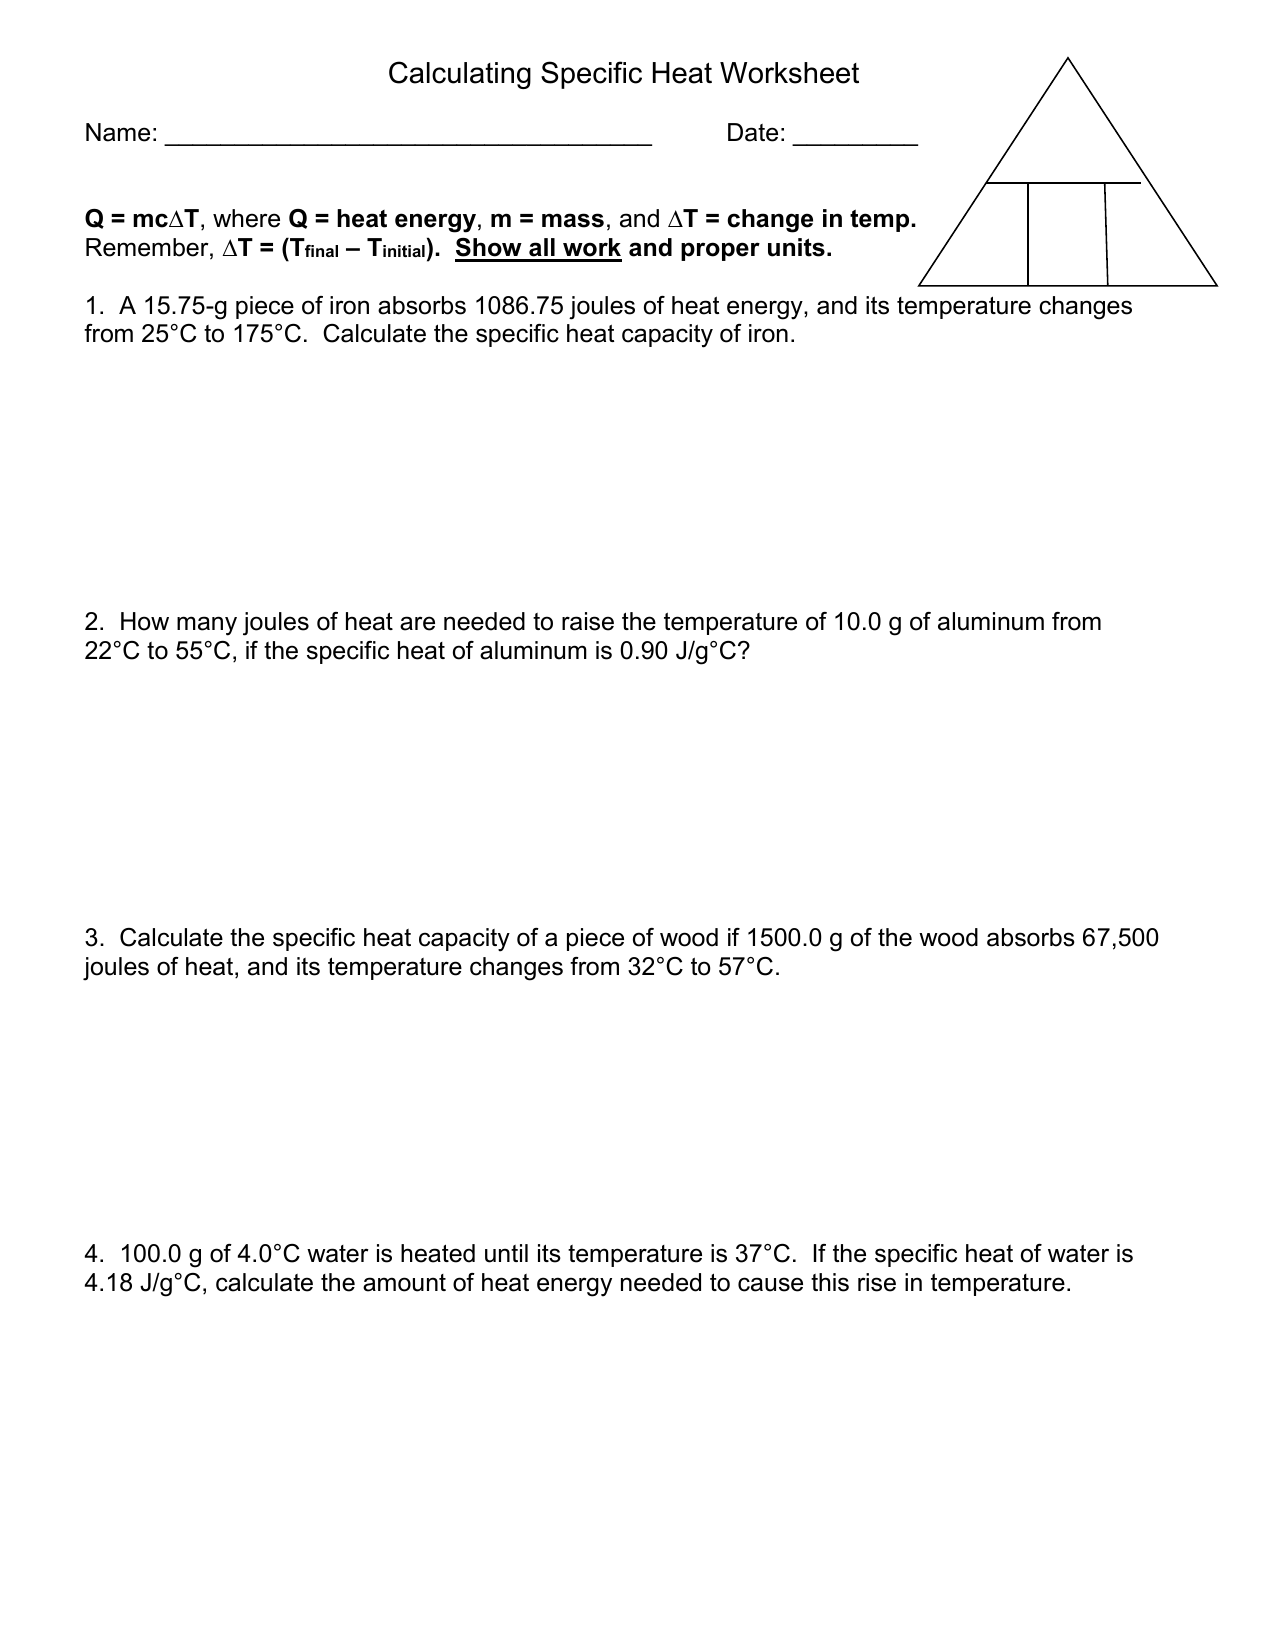 Specific Heat Worksheet Within Calculating Specific Heat Worksheet